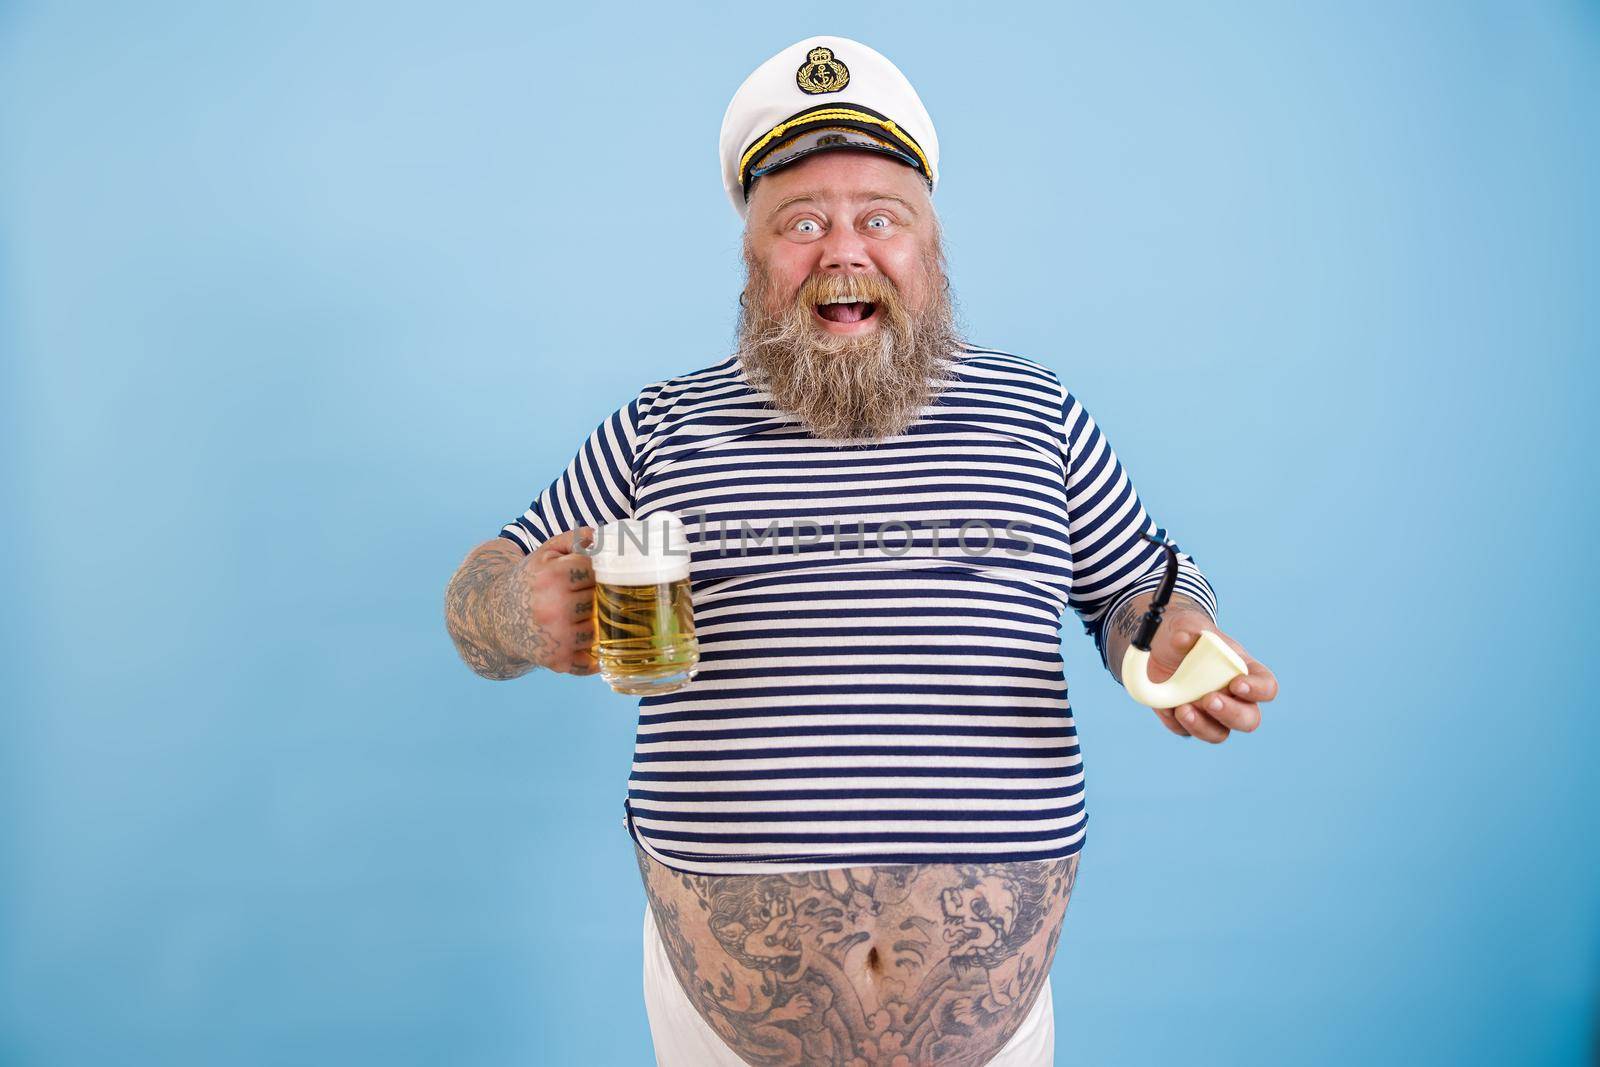 Joyful plus size person in sailor suit holds pipe and beer on light blue background by Yaroslav_astakhov